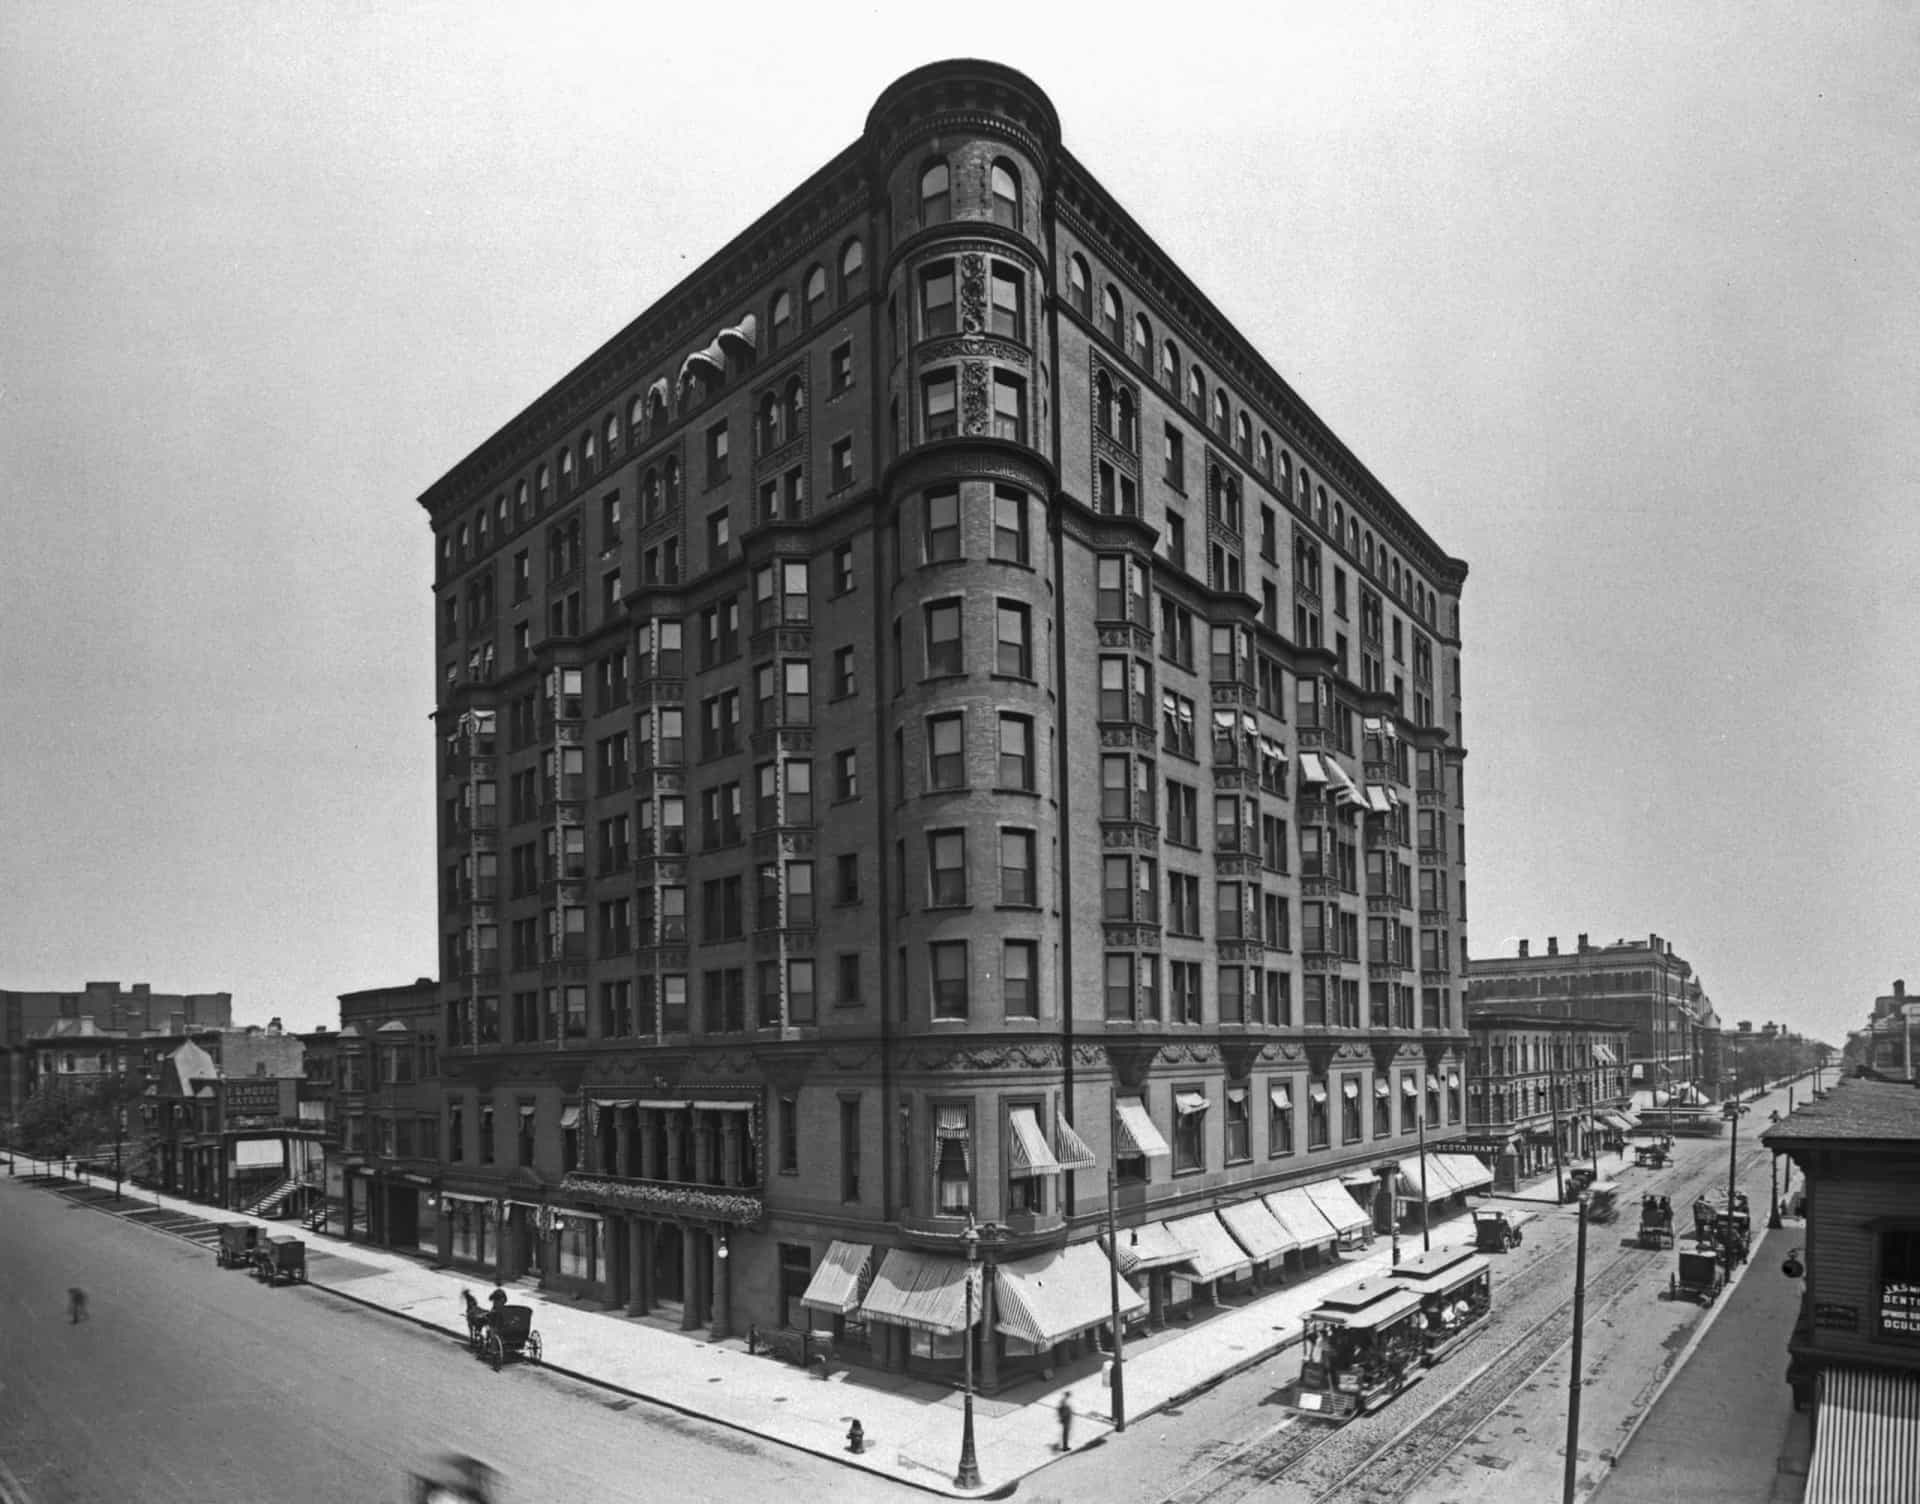 <p>Capone ran his Chicago operation from several hotels, most famously the Lexington Hotel, located at the corner of Michigan Avenue and 22nd Street. The hotel closed in 1980 and was demolished in 1995.</p>